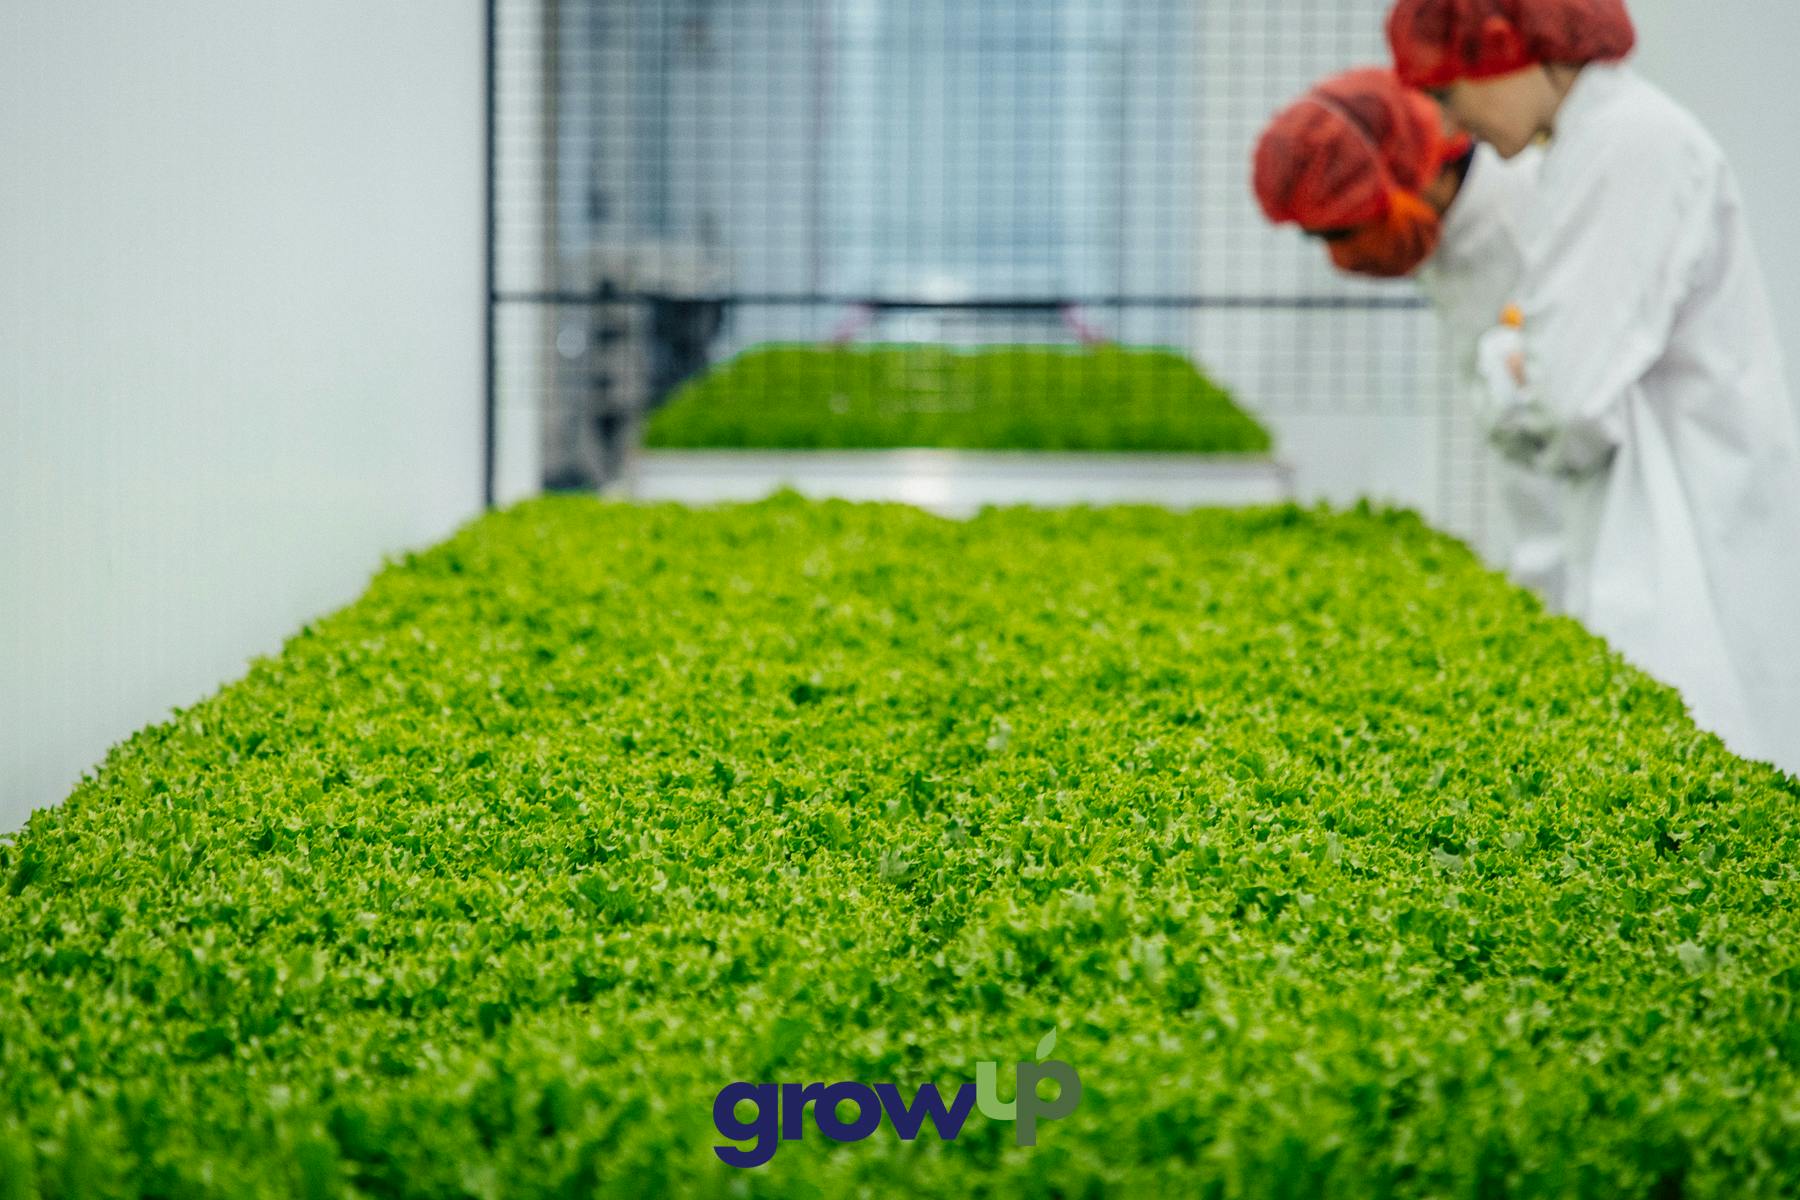 GrowUp - Lettuce being produced